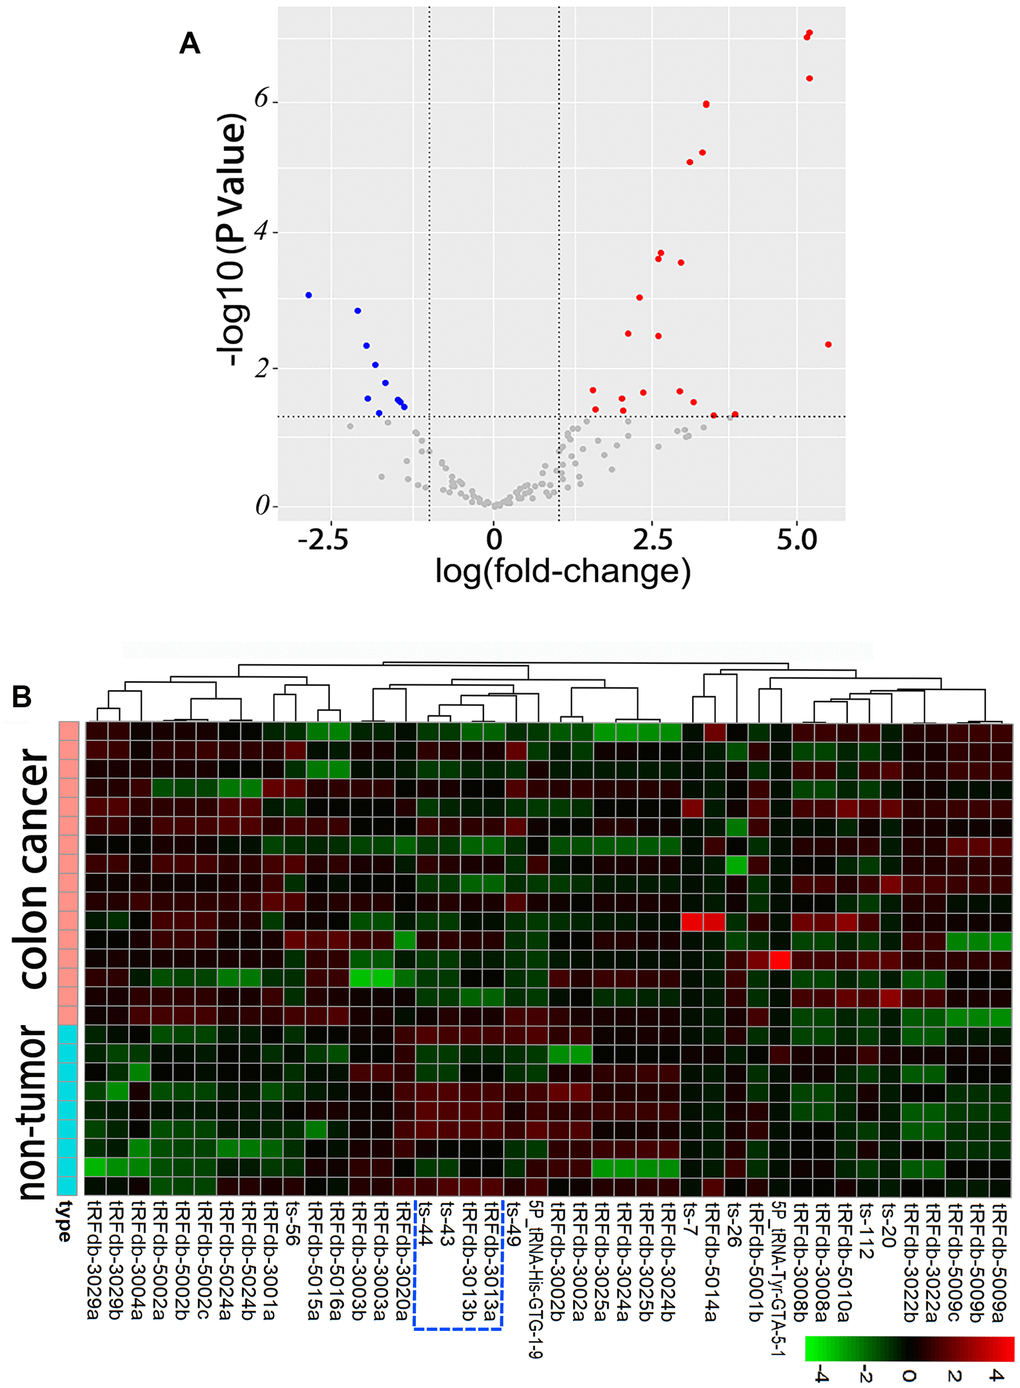 Differential expression analysis between paired colon adenocarcinomas (n=16) and non-tumor controls (n=9) of TCGA-COAD dataset. (A) Volcano plots of the differentially expressed tsRNAs, including 15 up-regulated and 27 down-regulated tsRNAs. (B) Hierarchical clustering and heatmap of differentially expressed tsRNAs, the up-regulated tsRNAs are clustered in red-shaded areas, and the green-shaded areas indicate down-regulation.